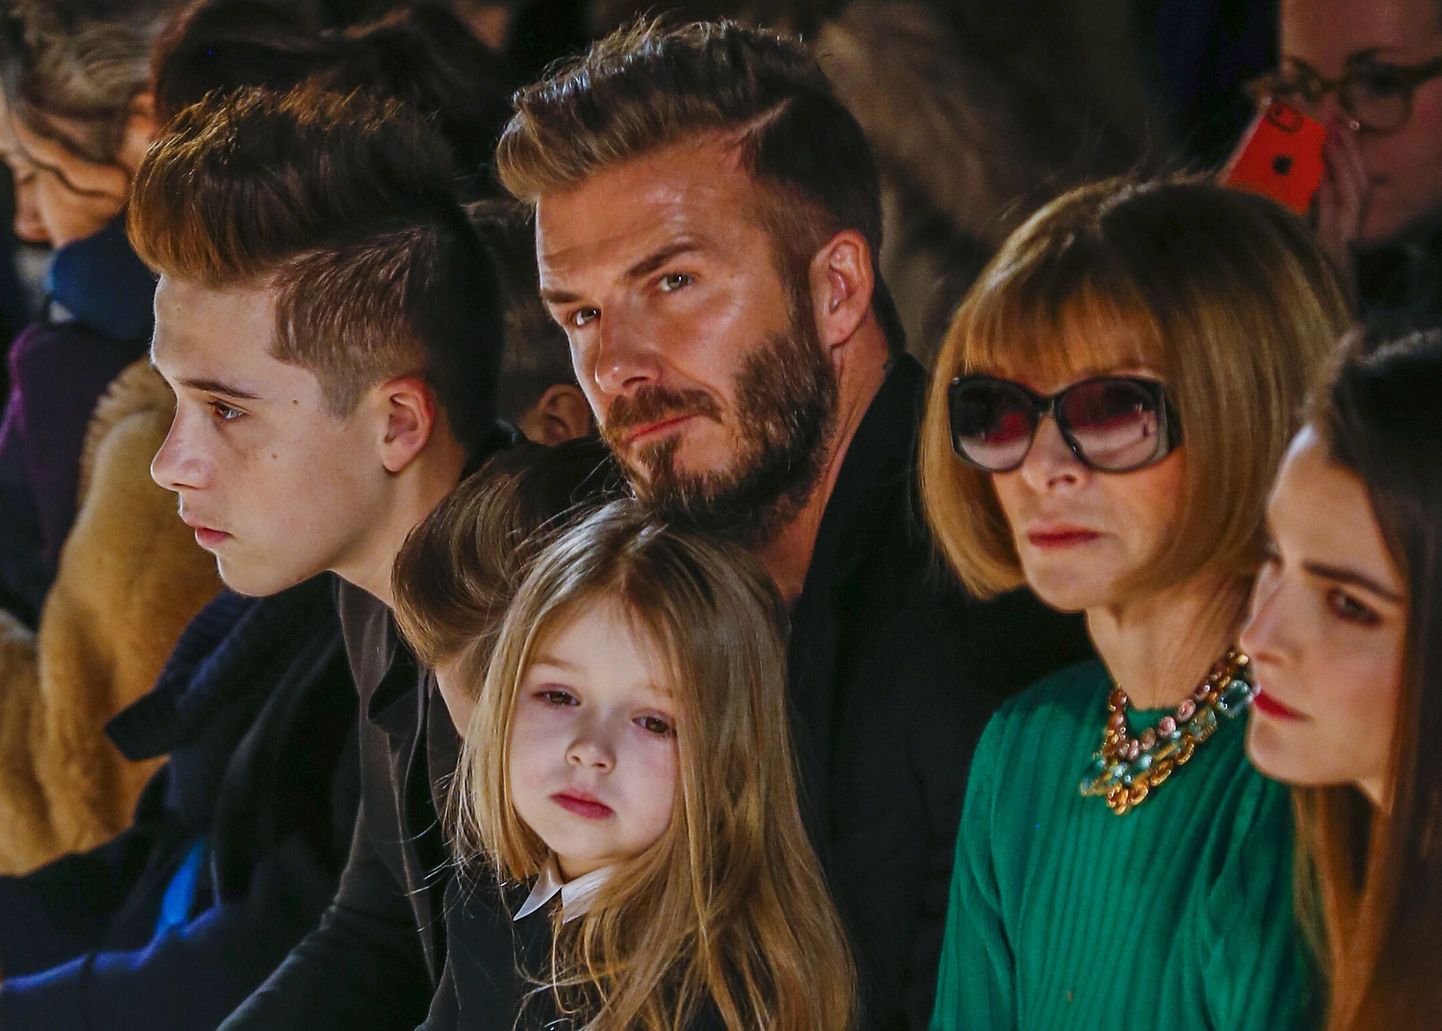 Former England captain David Beckham sits next to U.S. Vogue editor Anna Wintour (2nd R) with his daughter, Harper, on his lap and son Brooklyn (L) during a presentation of the Victoria Beckham Fall/Winter 2015 collection during New York Fashion Week February 15, 2015. REUTERS/Lucas Jackson (UNITED STATES - Tags: FASHION SOCIETY ENTERTAINMENT SPORT)